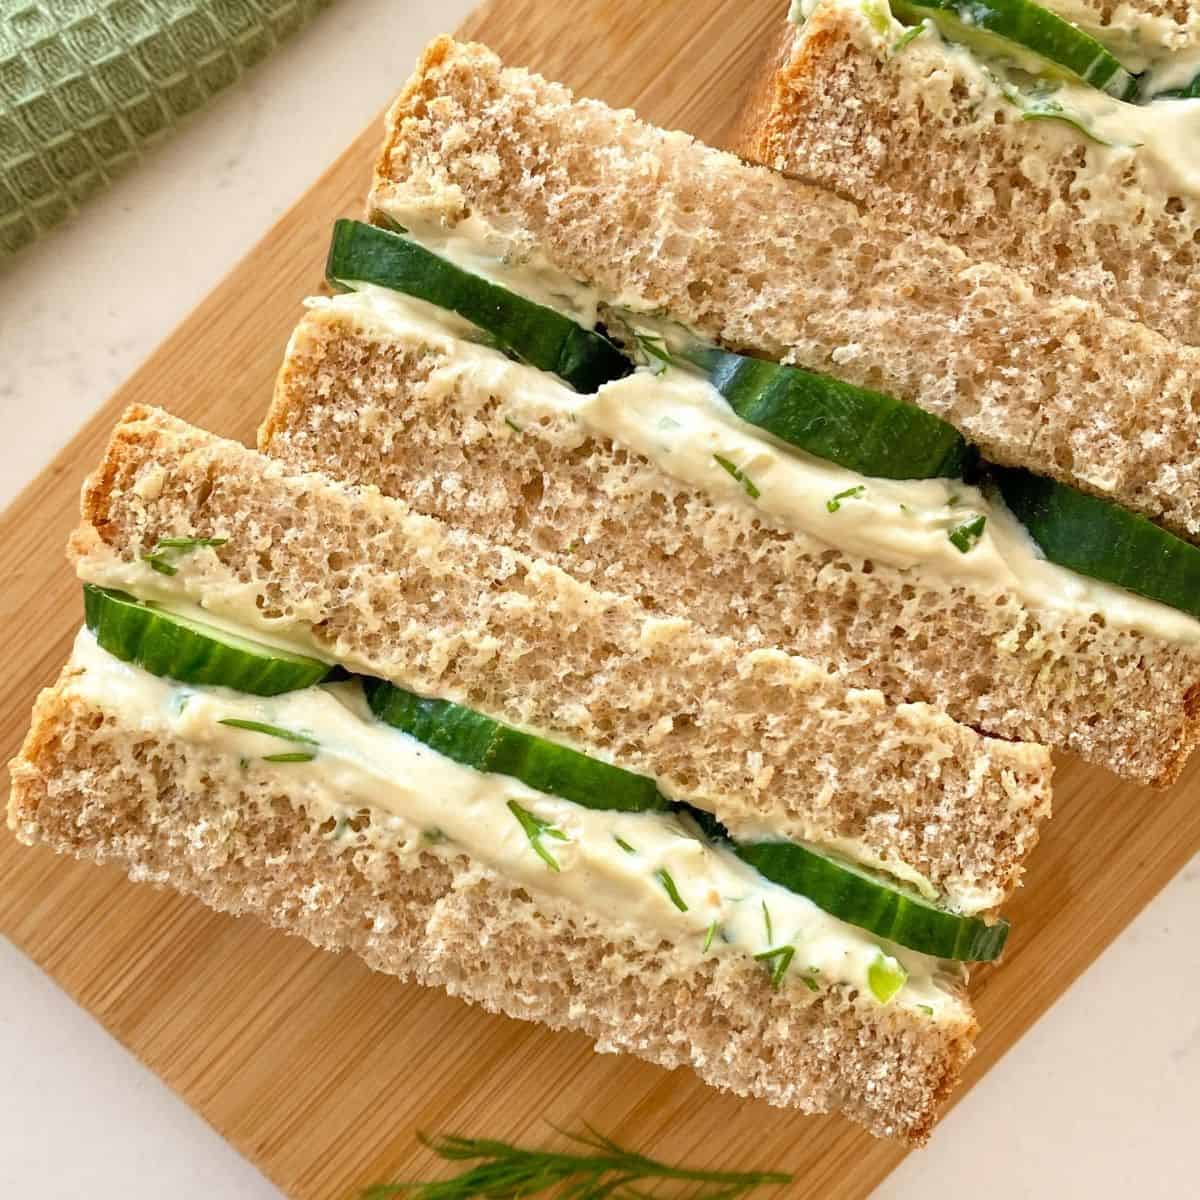 Cucumber and cream cheese sandwiches cut side up and sitting on cutting board.